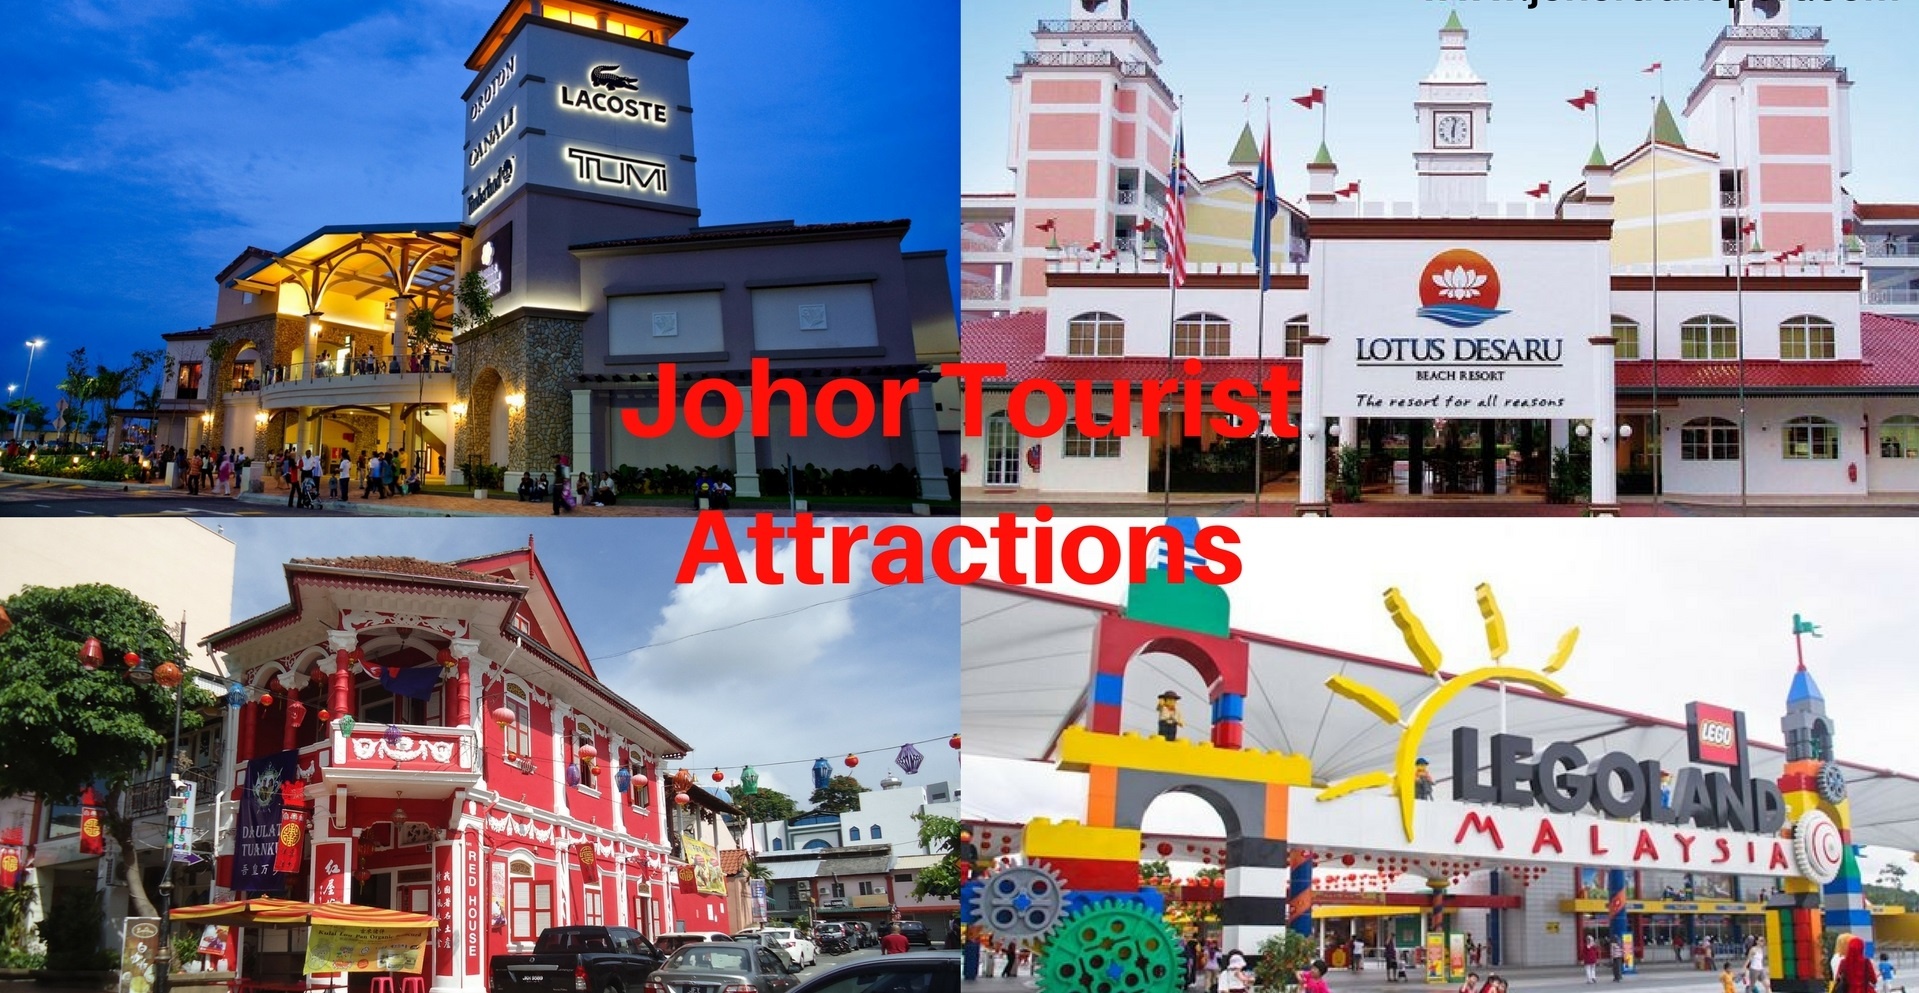 Johor Tourist Attractions Marina East Place of attraction